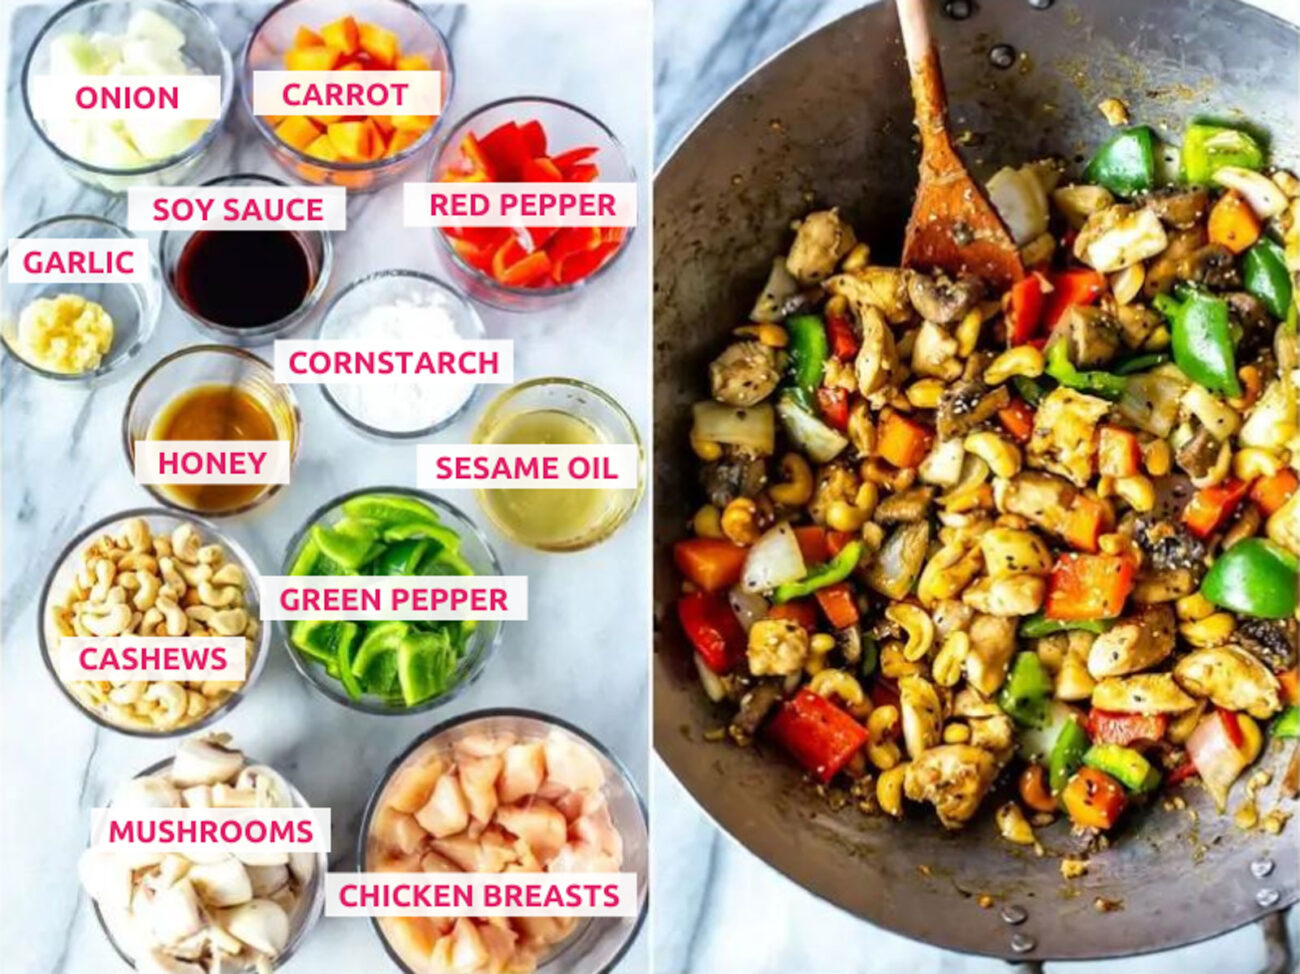 Ingredients for cashew chicken: chicken breasts, mushrooms, cashews, green pepper, sesame oil, honey, cornstarch, soy sauce, garlic, carrot, red pepper and onion.